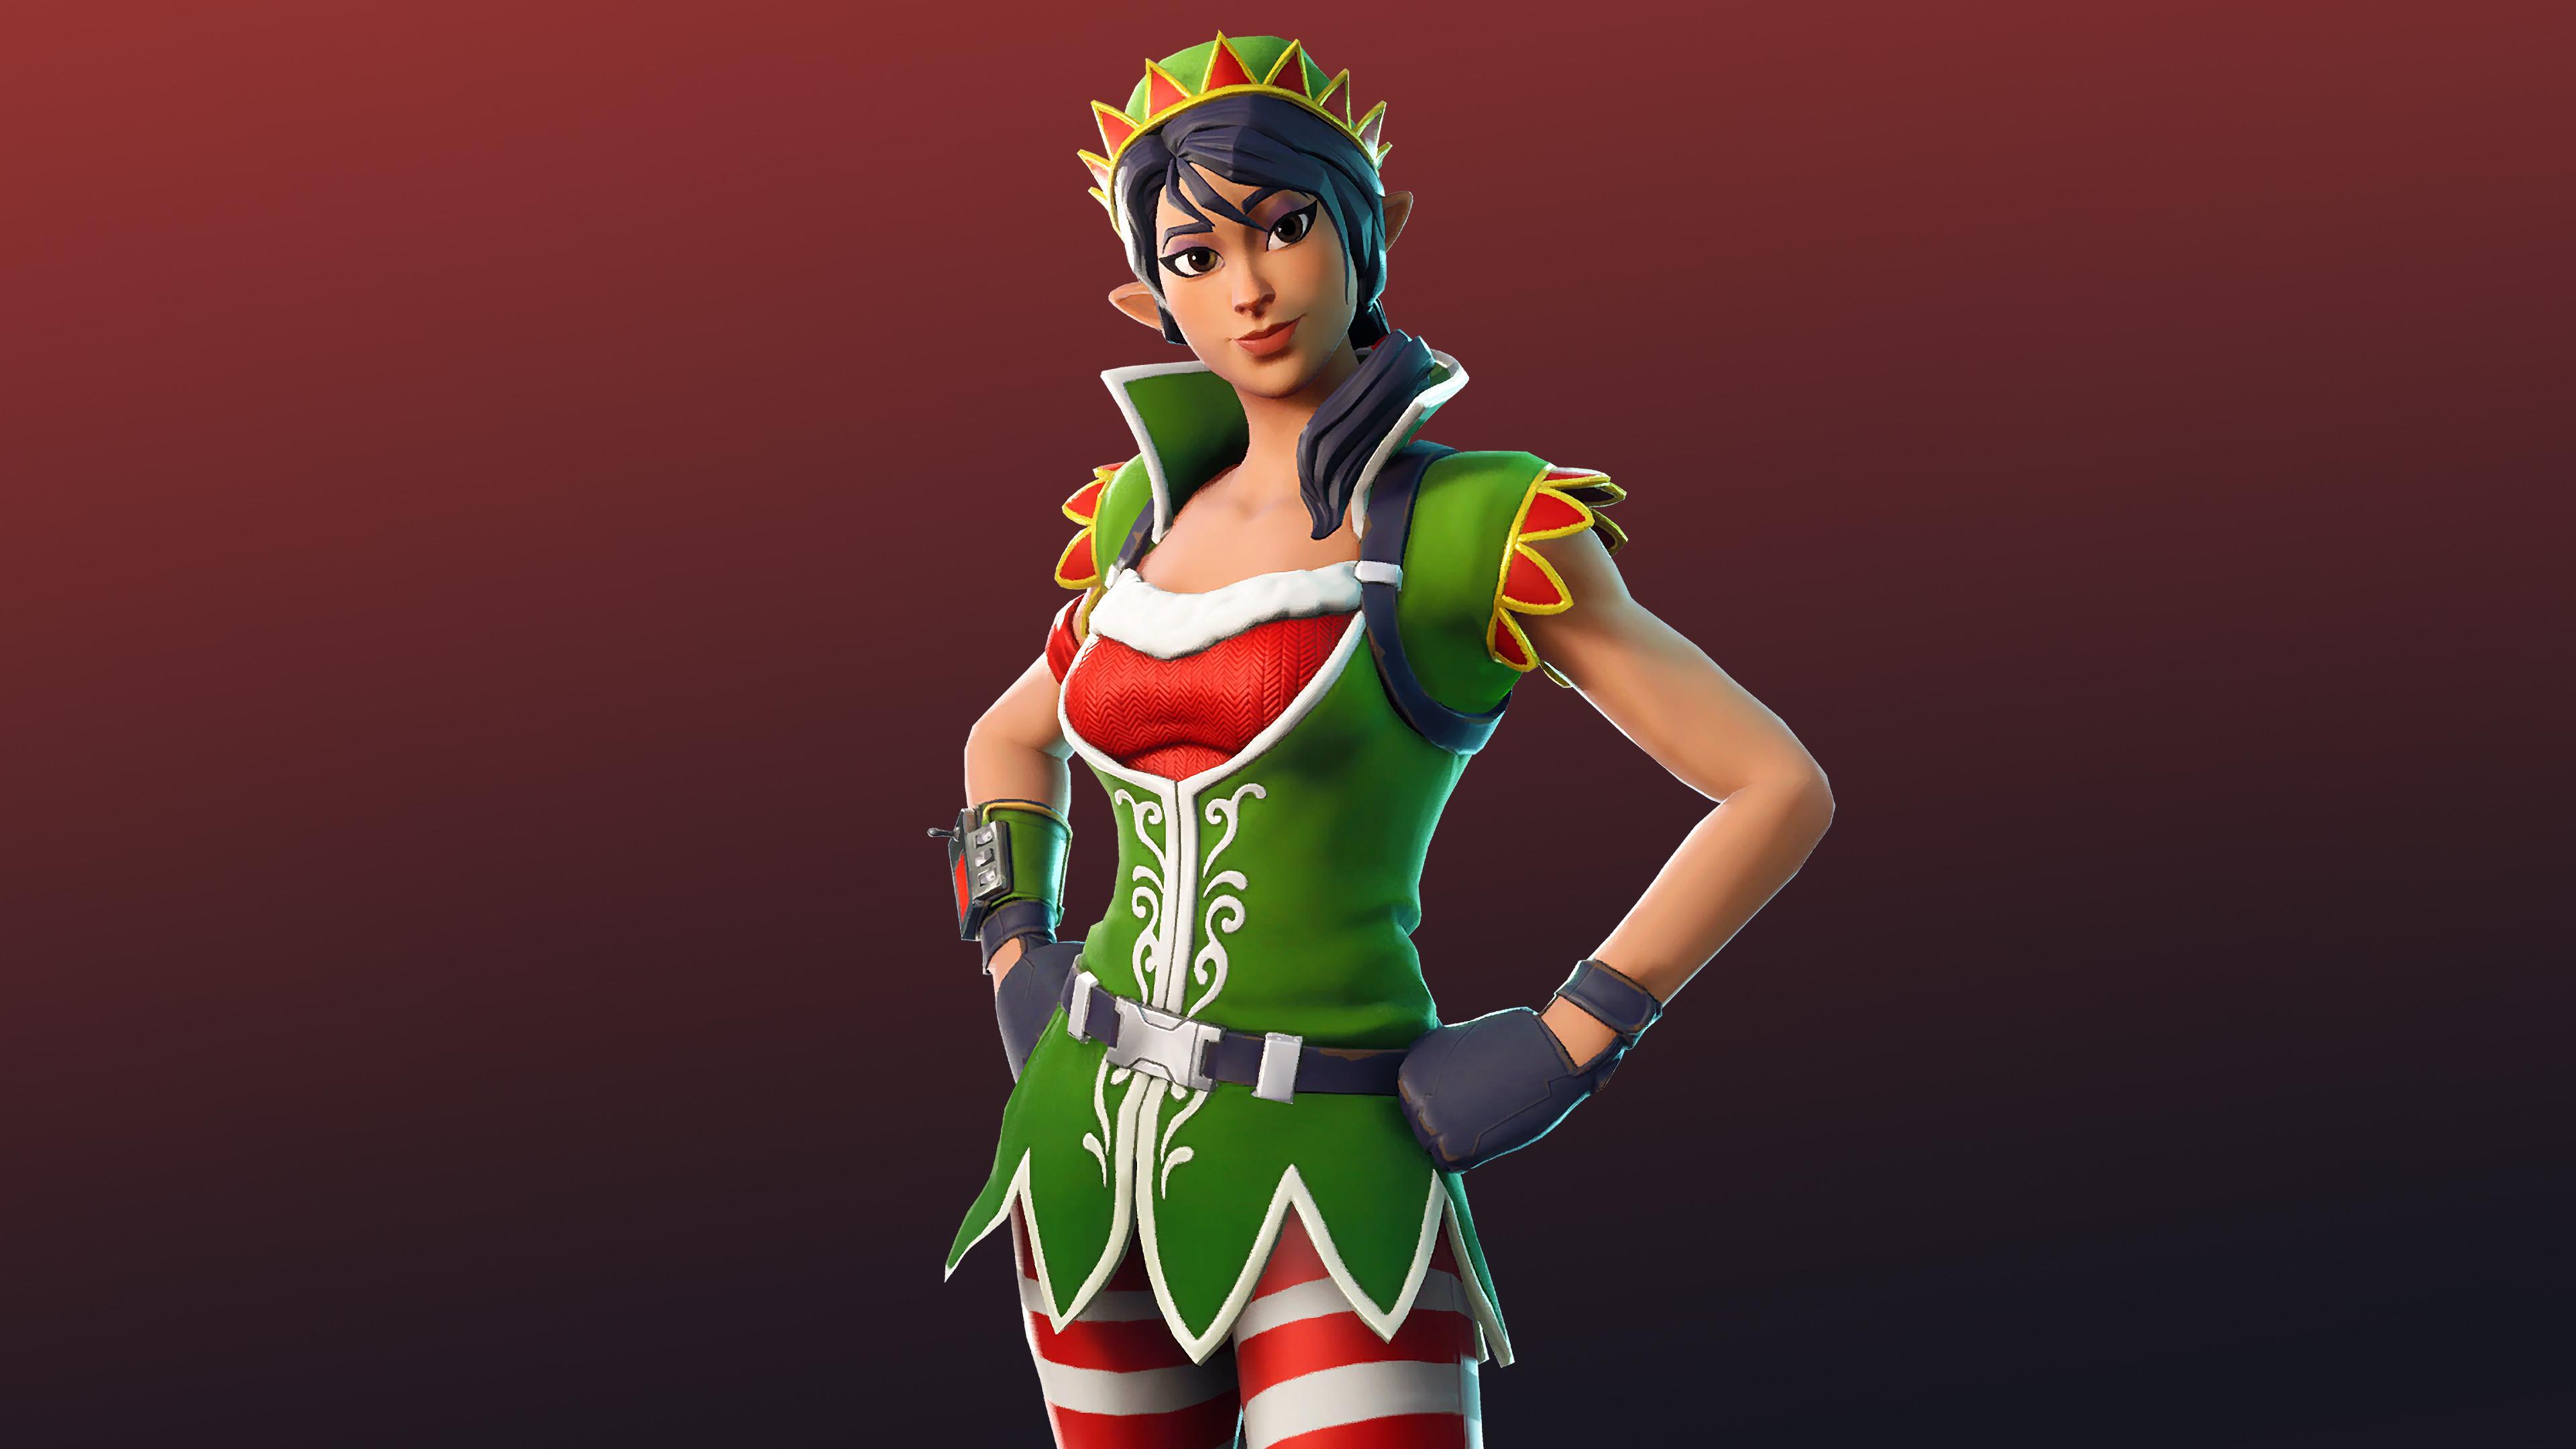 Tinseltoes Fortnite Wallpapers